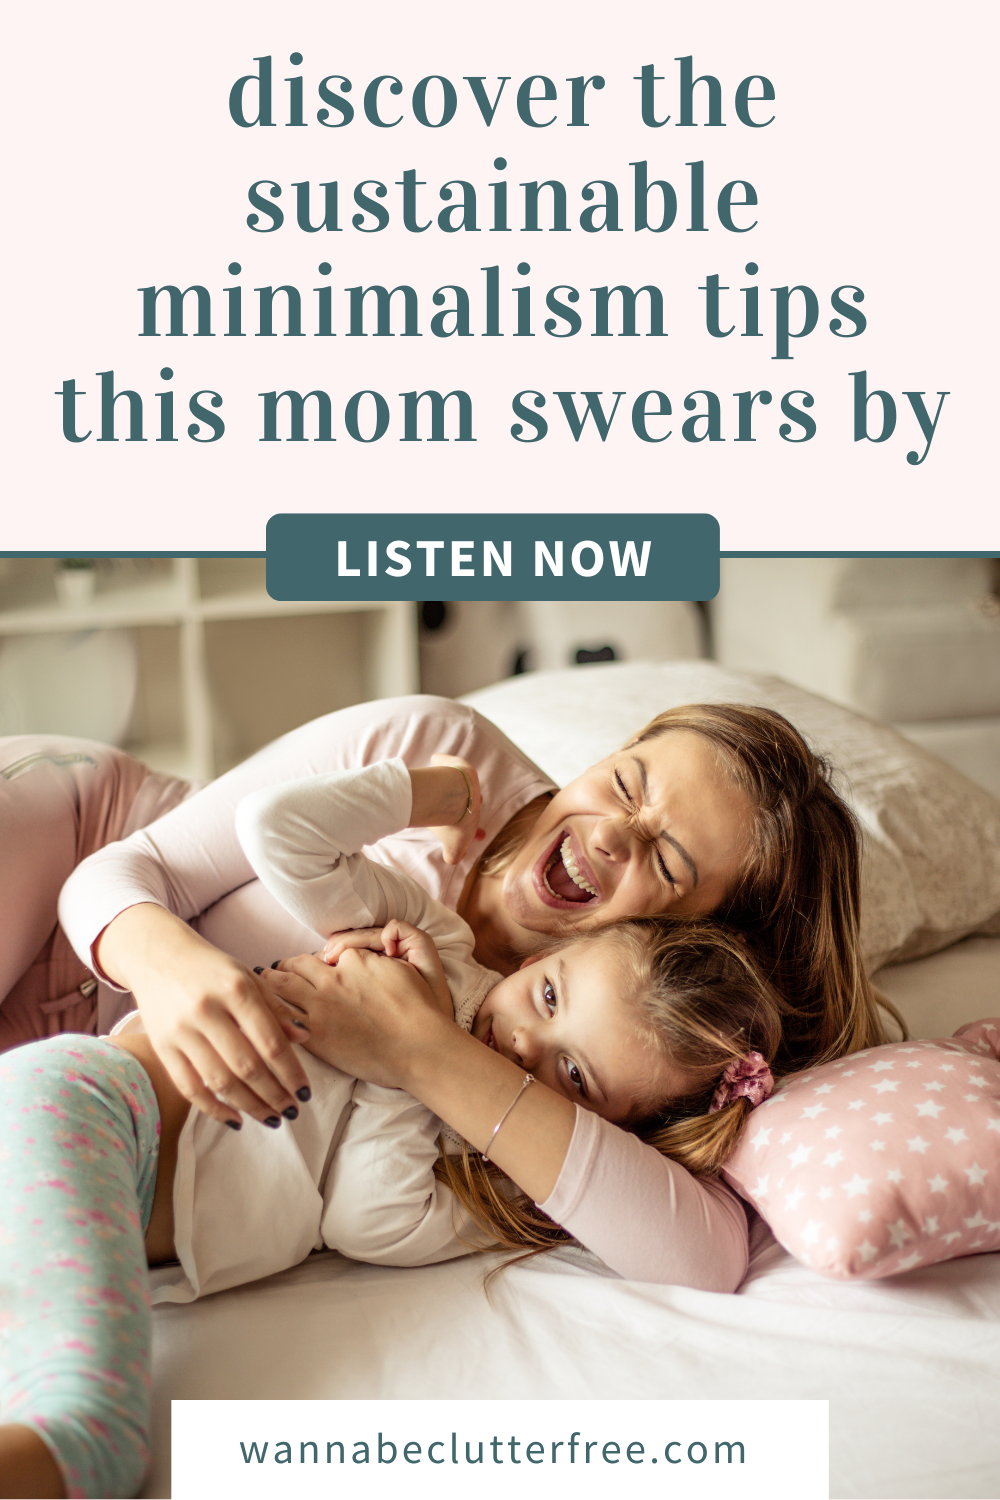 Discover the sustainable minimalism tips this mom swears by